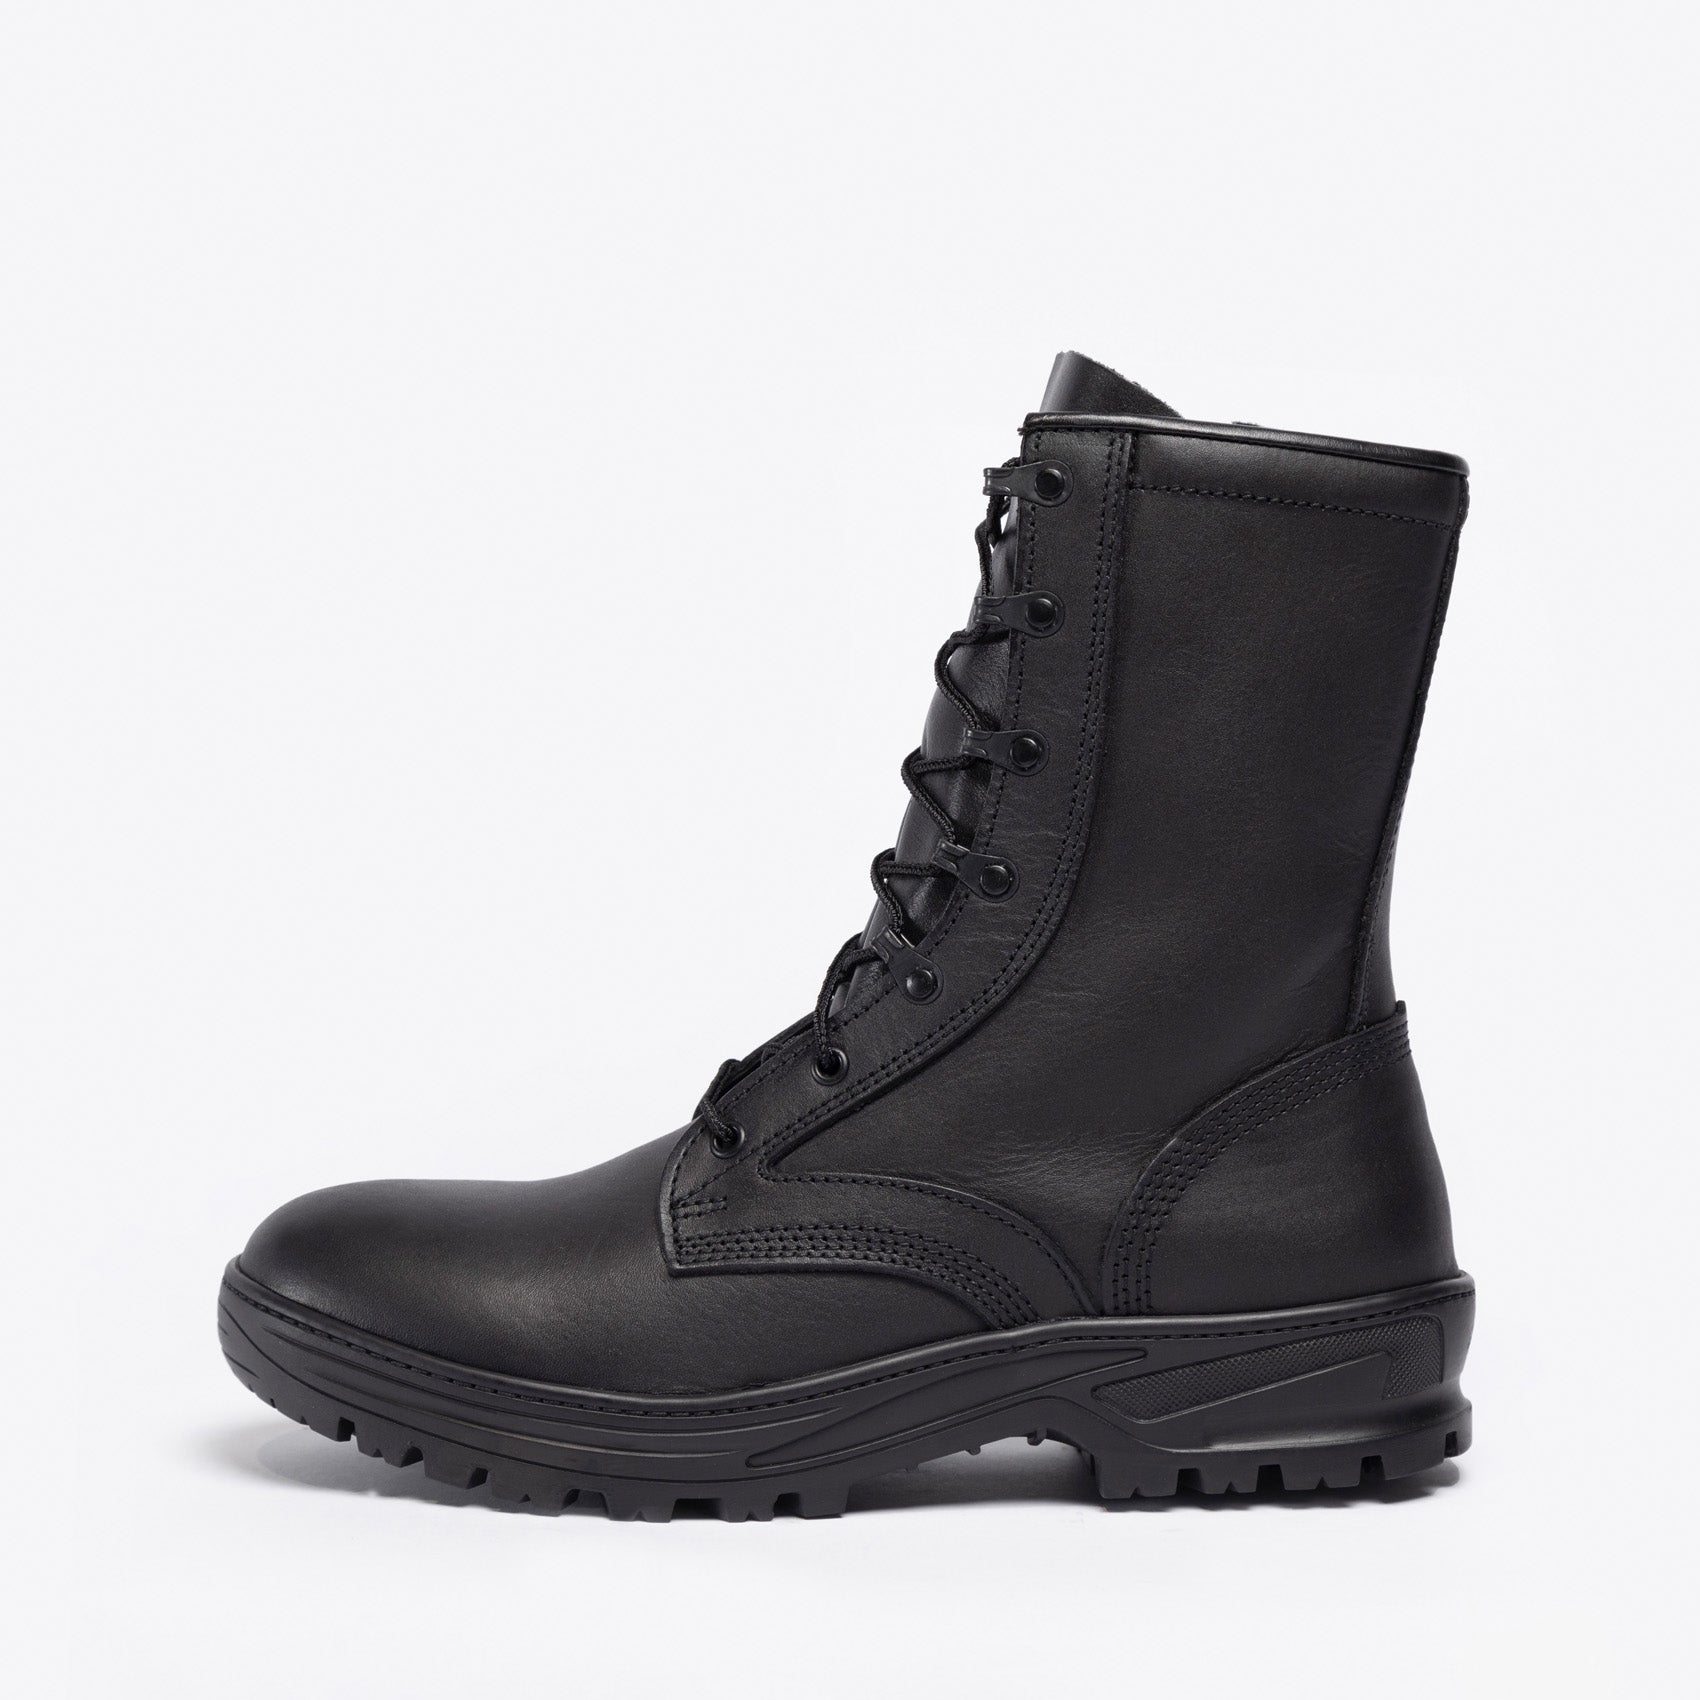 full-grain leather tactical boots